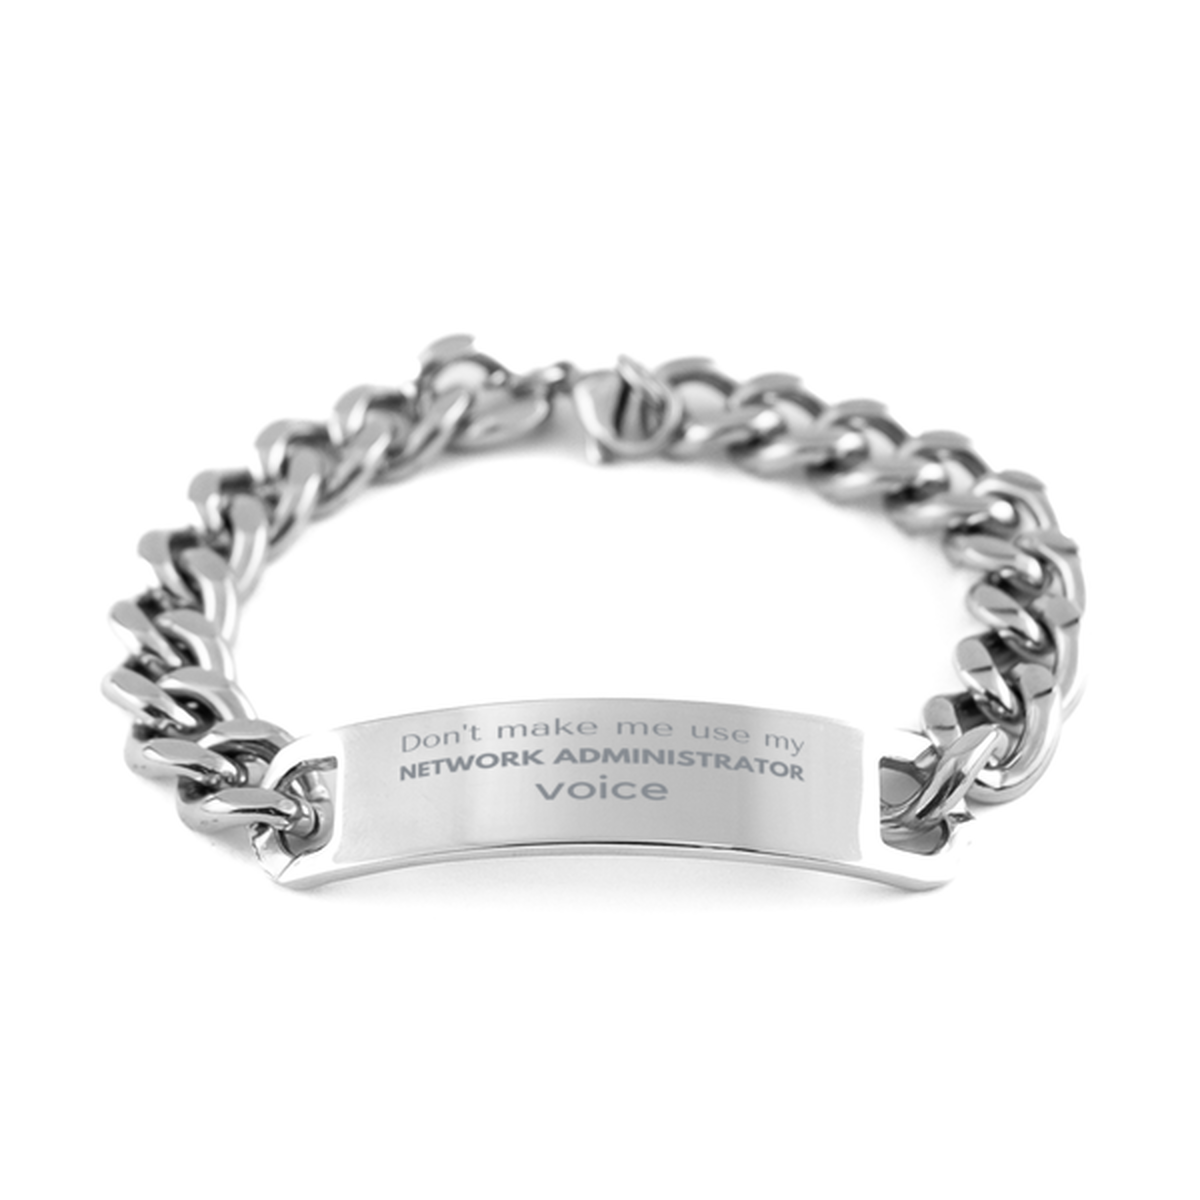 Don't make me use my Network Administrator voice, Sarcasm Network Administrator Gifts, Christmas Network Administrator Cuban Chain Stainless Steel Bracelet Birthday Unique Gifts For Network Administrator Coworkers, Men, Women, Colleague, Friends